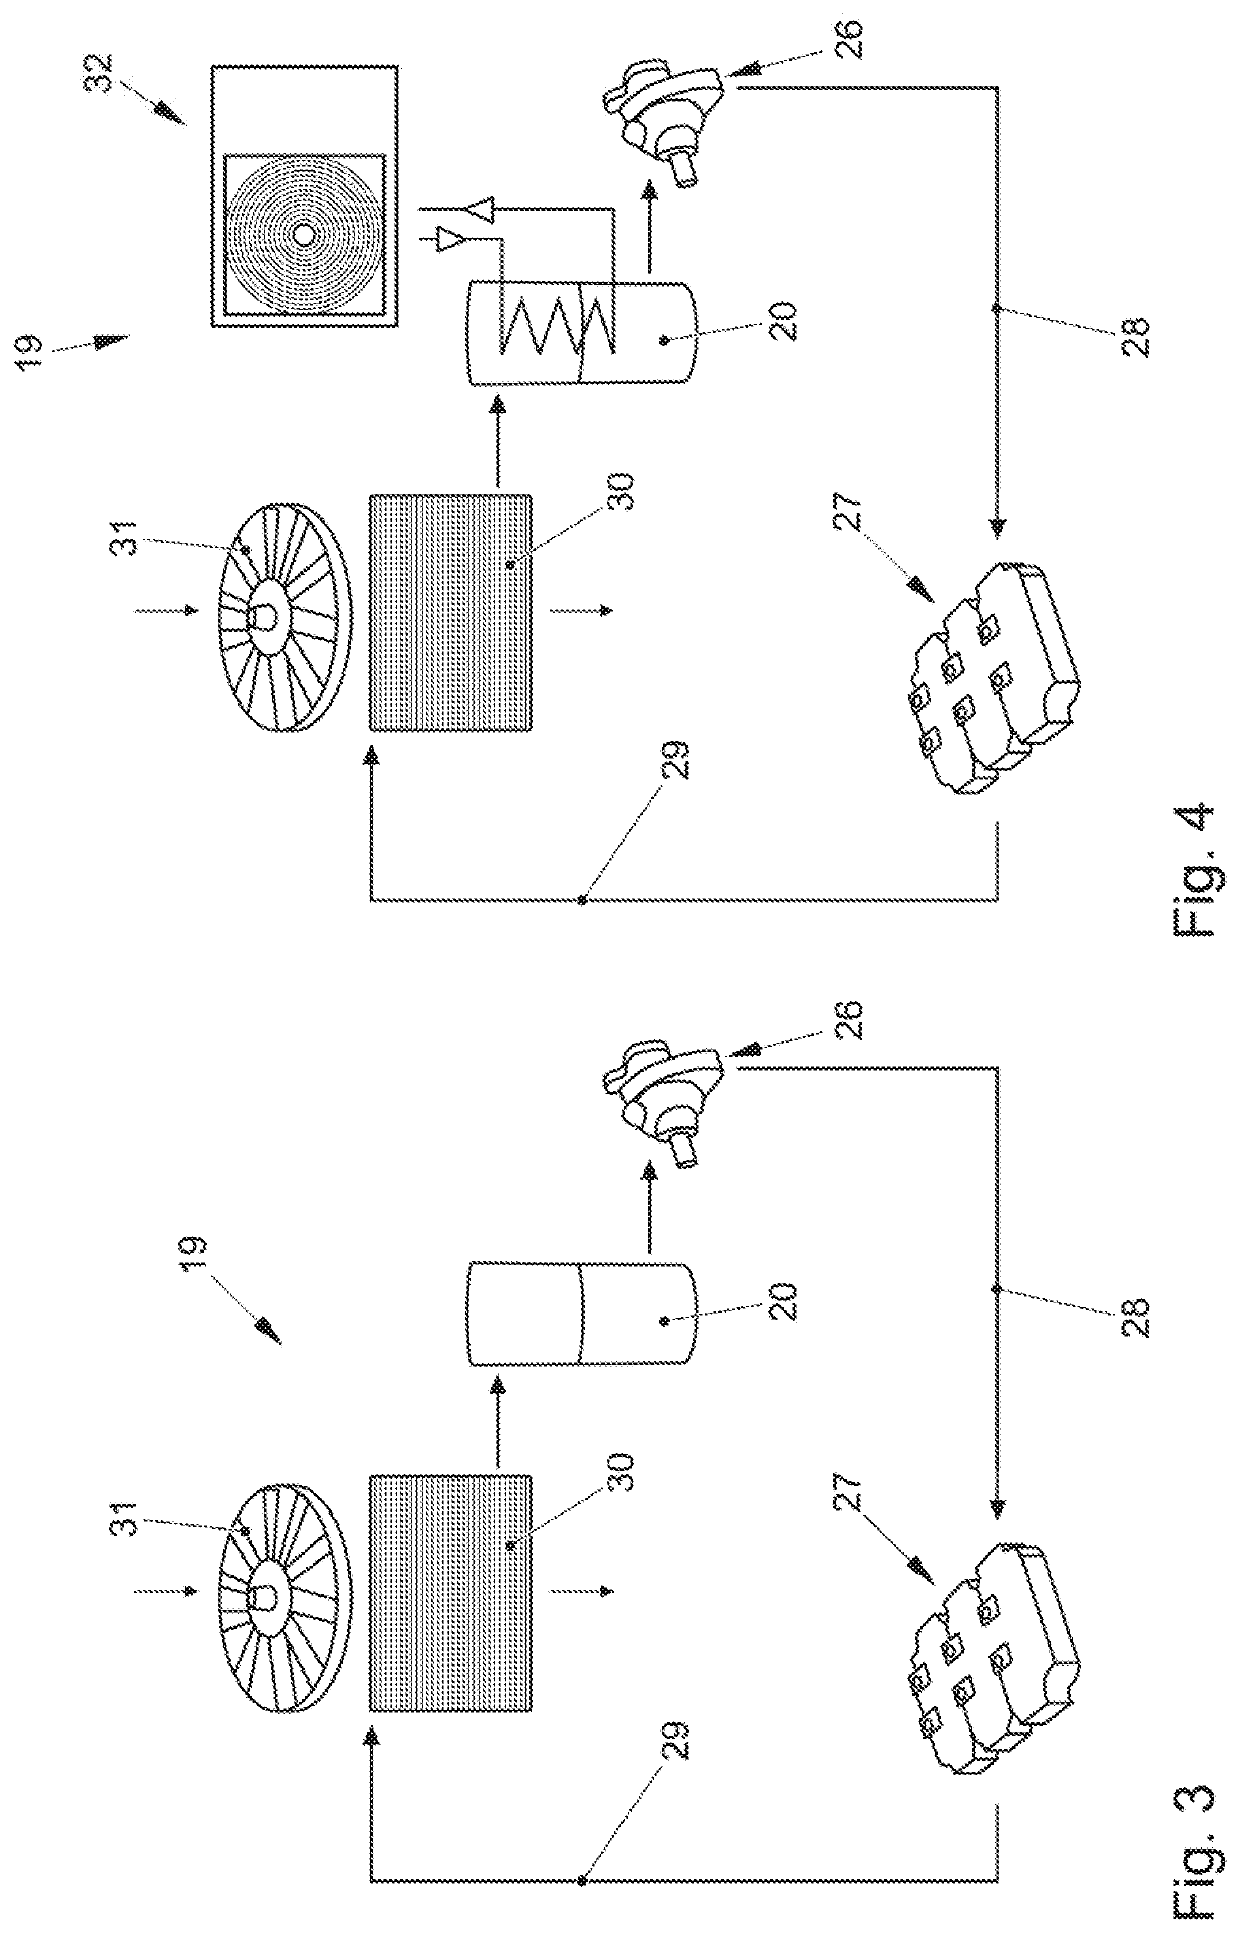 Charging system for electric vehicles